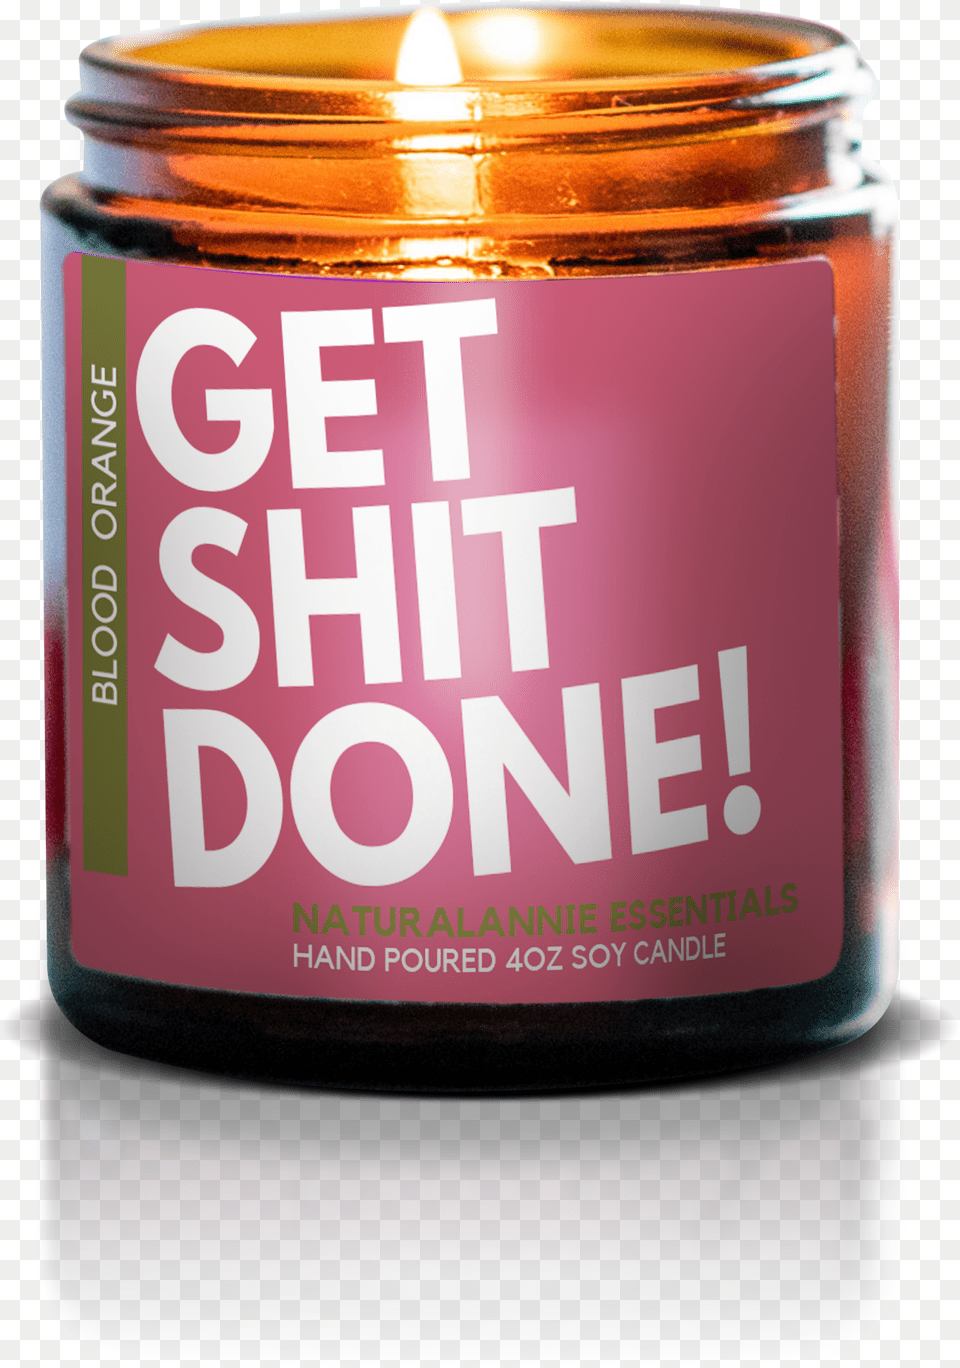 Get Shit Done Blood Orange Scented Soy Candle Naturalannie Blood Orange Candle, Jar, Can, Tin Free Png Download